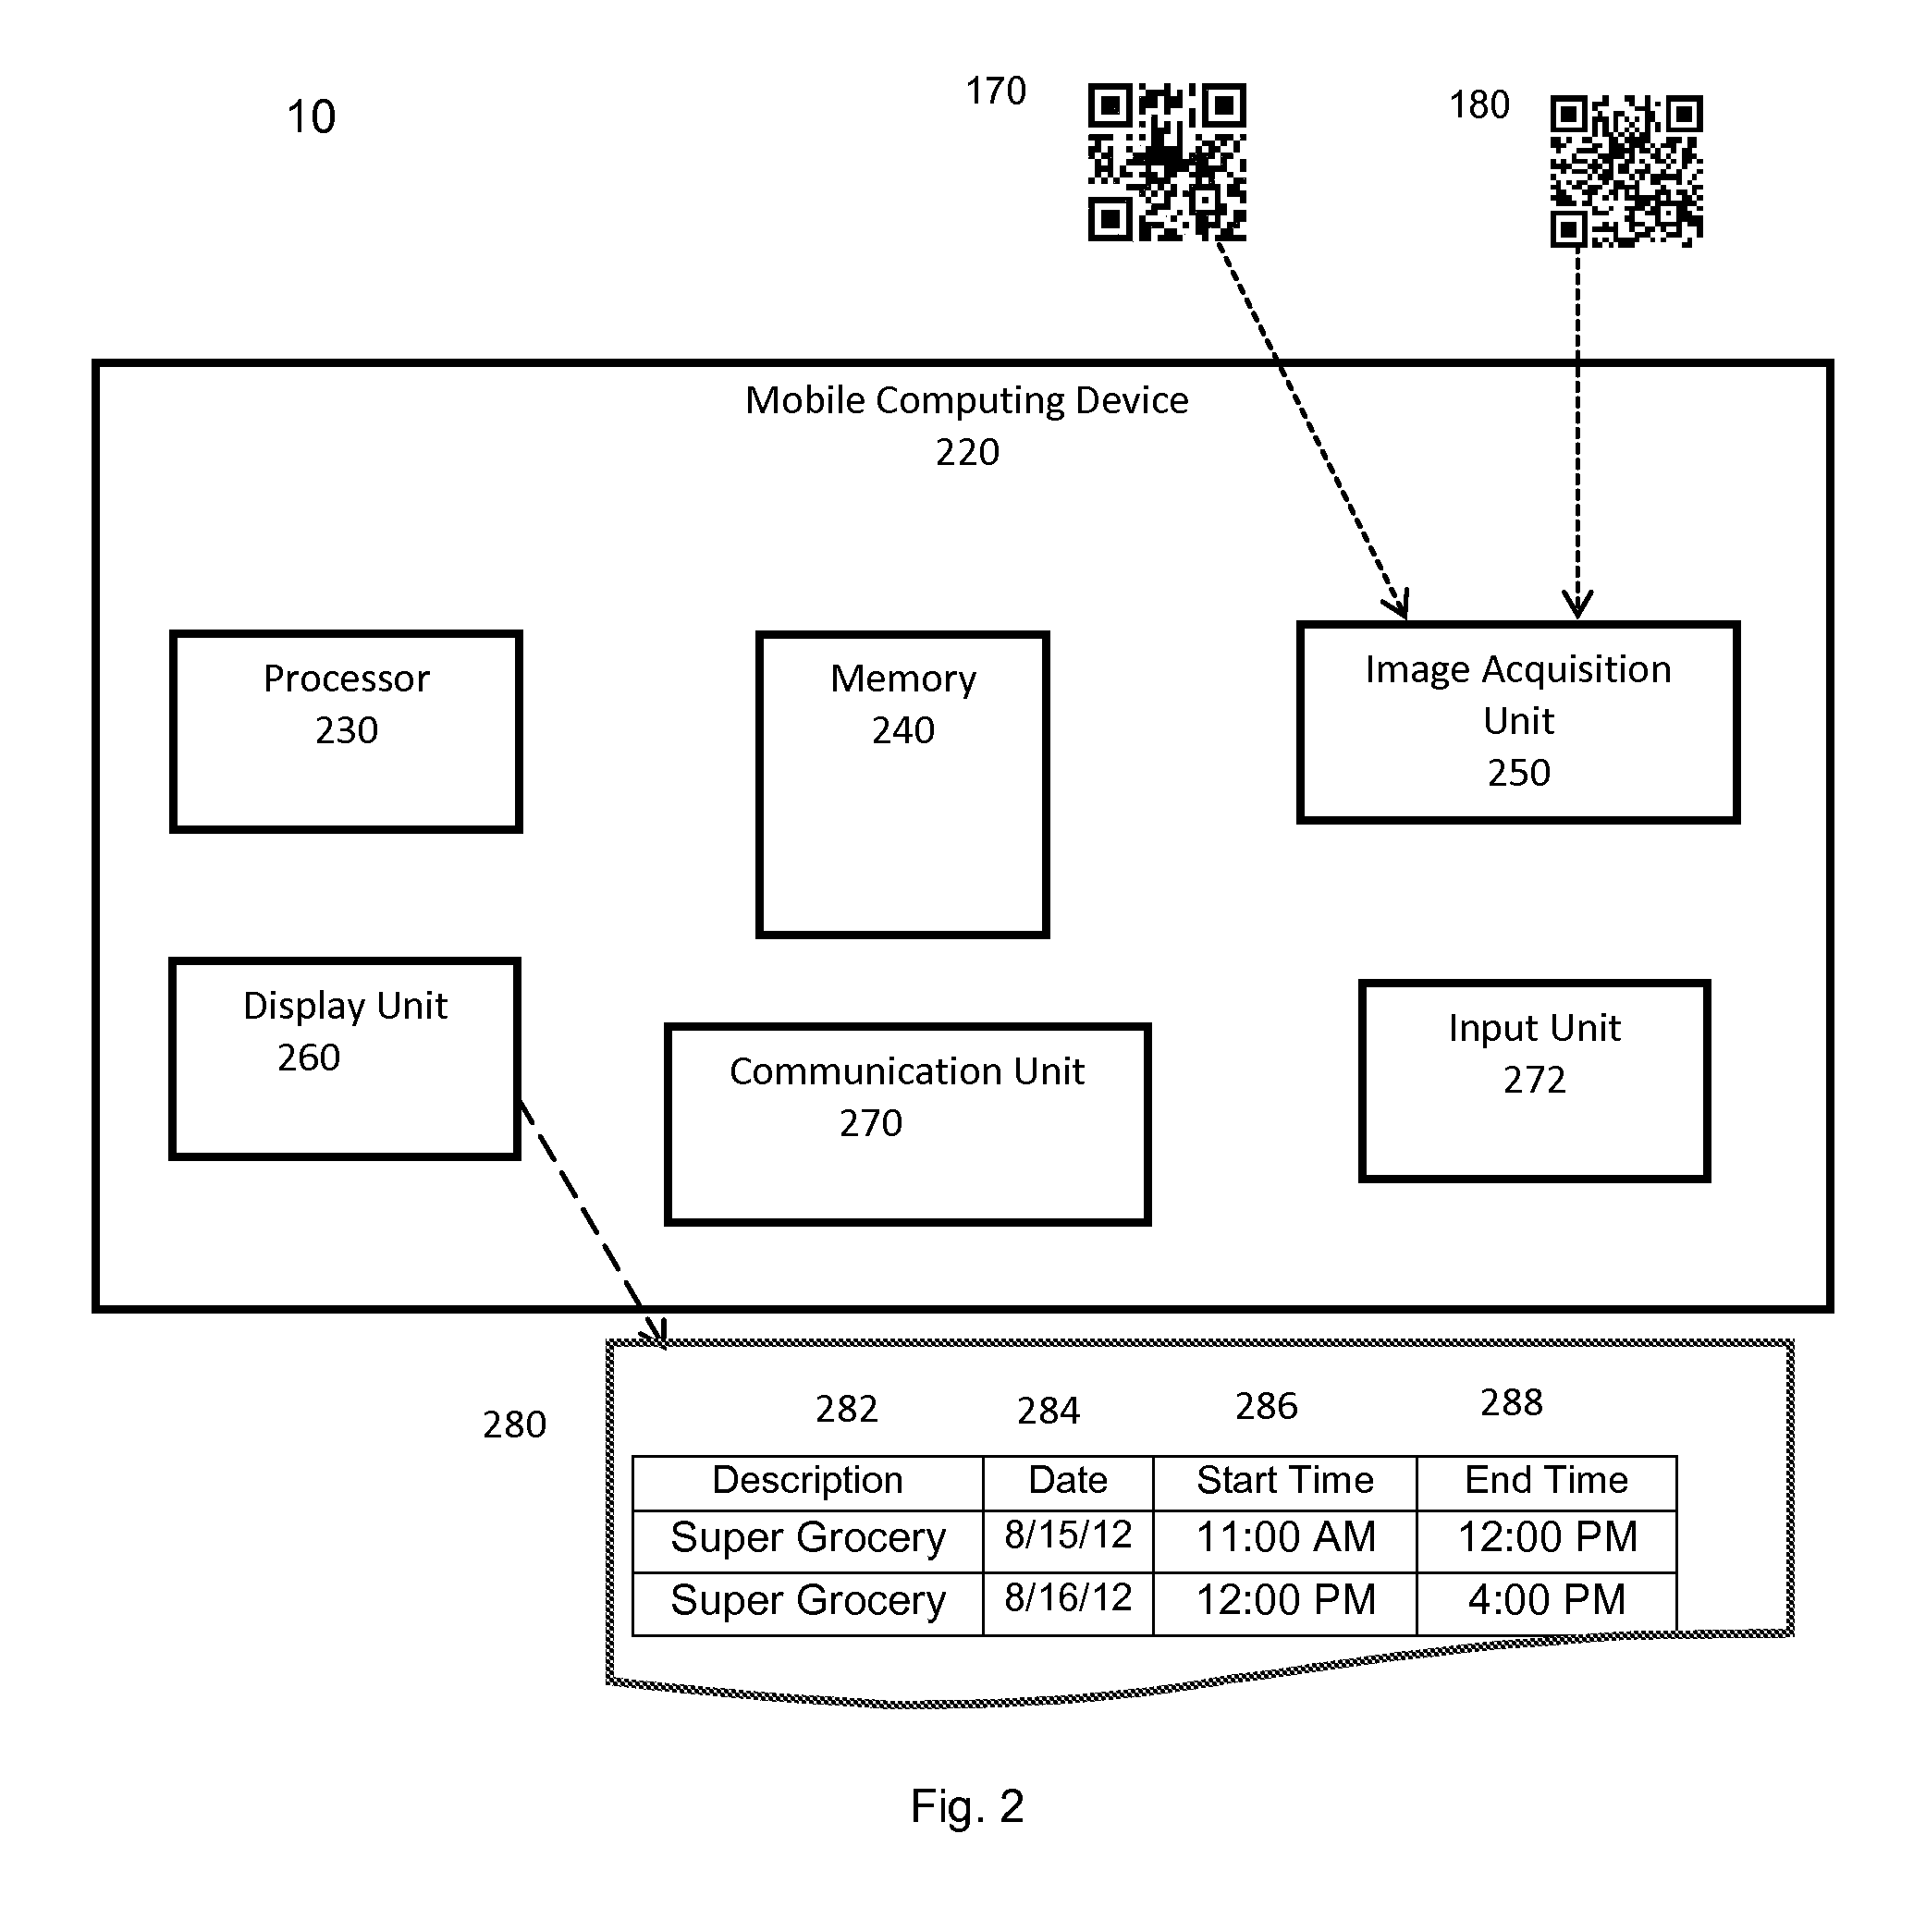 System and method for acquiring and sharing scheduling data